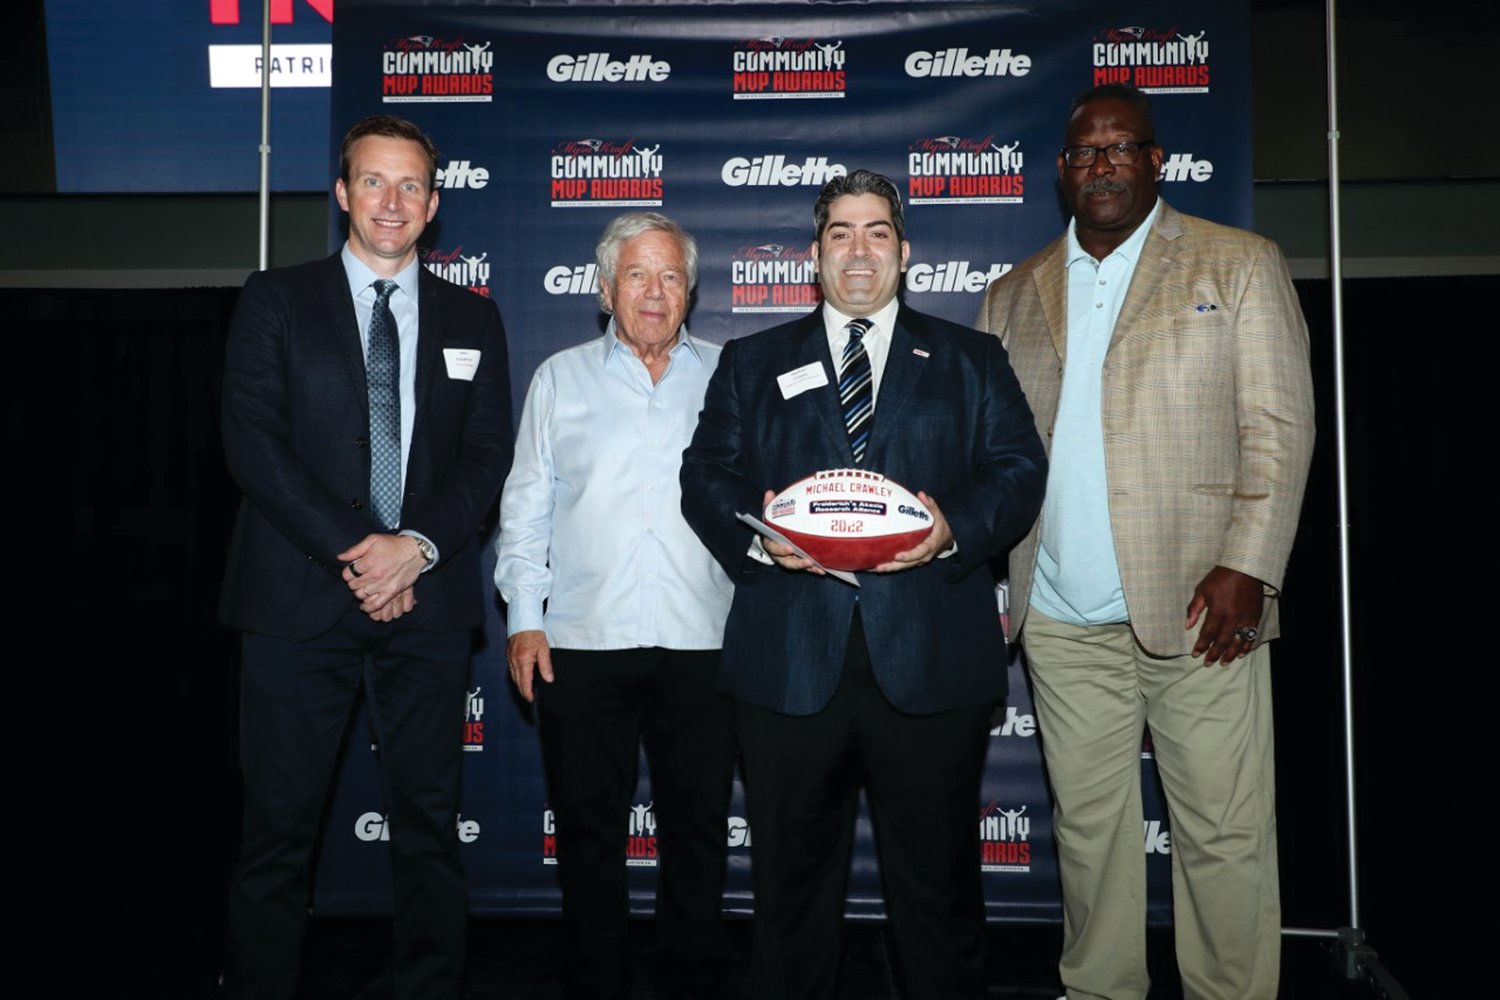 LOCAL MVP: Procter & Gamble’s VP of Grooming, North America, John Claughton (far left), Patriots Chairman and CEO Robert Kraft and Patriots and Pro Football Hall of Famer Andre Tippett congratulate Michael Crawley of Cranston, for being selected as a 2022 Myra Kraft Community MVP Award winner. During the June 8 luncheon, the Kraft family, the Patriots Foundation and Gillette awarded $275,000 in grants to 26 New England nonprofits. The Freiderich’s Ataxia Research Alliance received a $10,000 grant in honor of Crawley’s volunteer efforts.